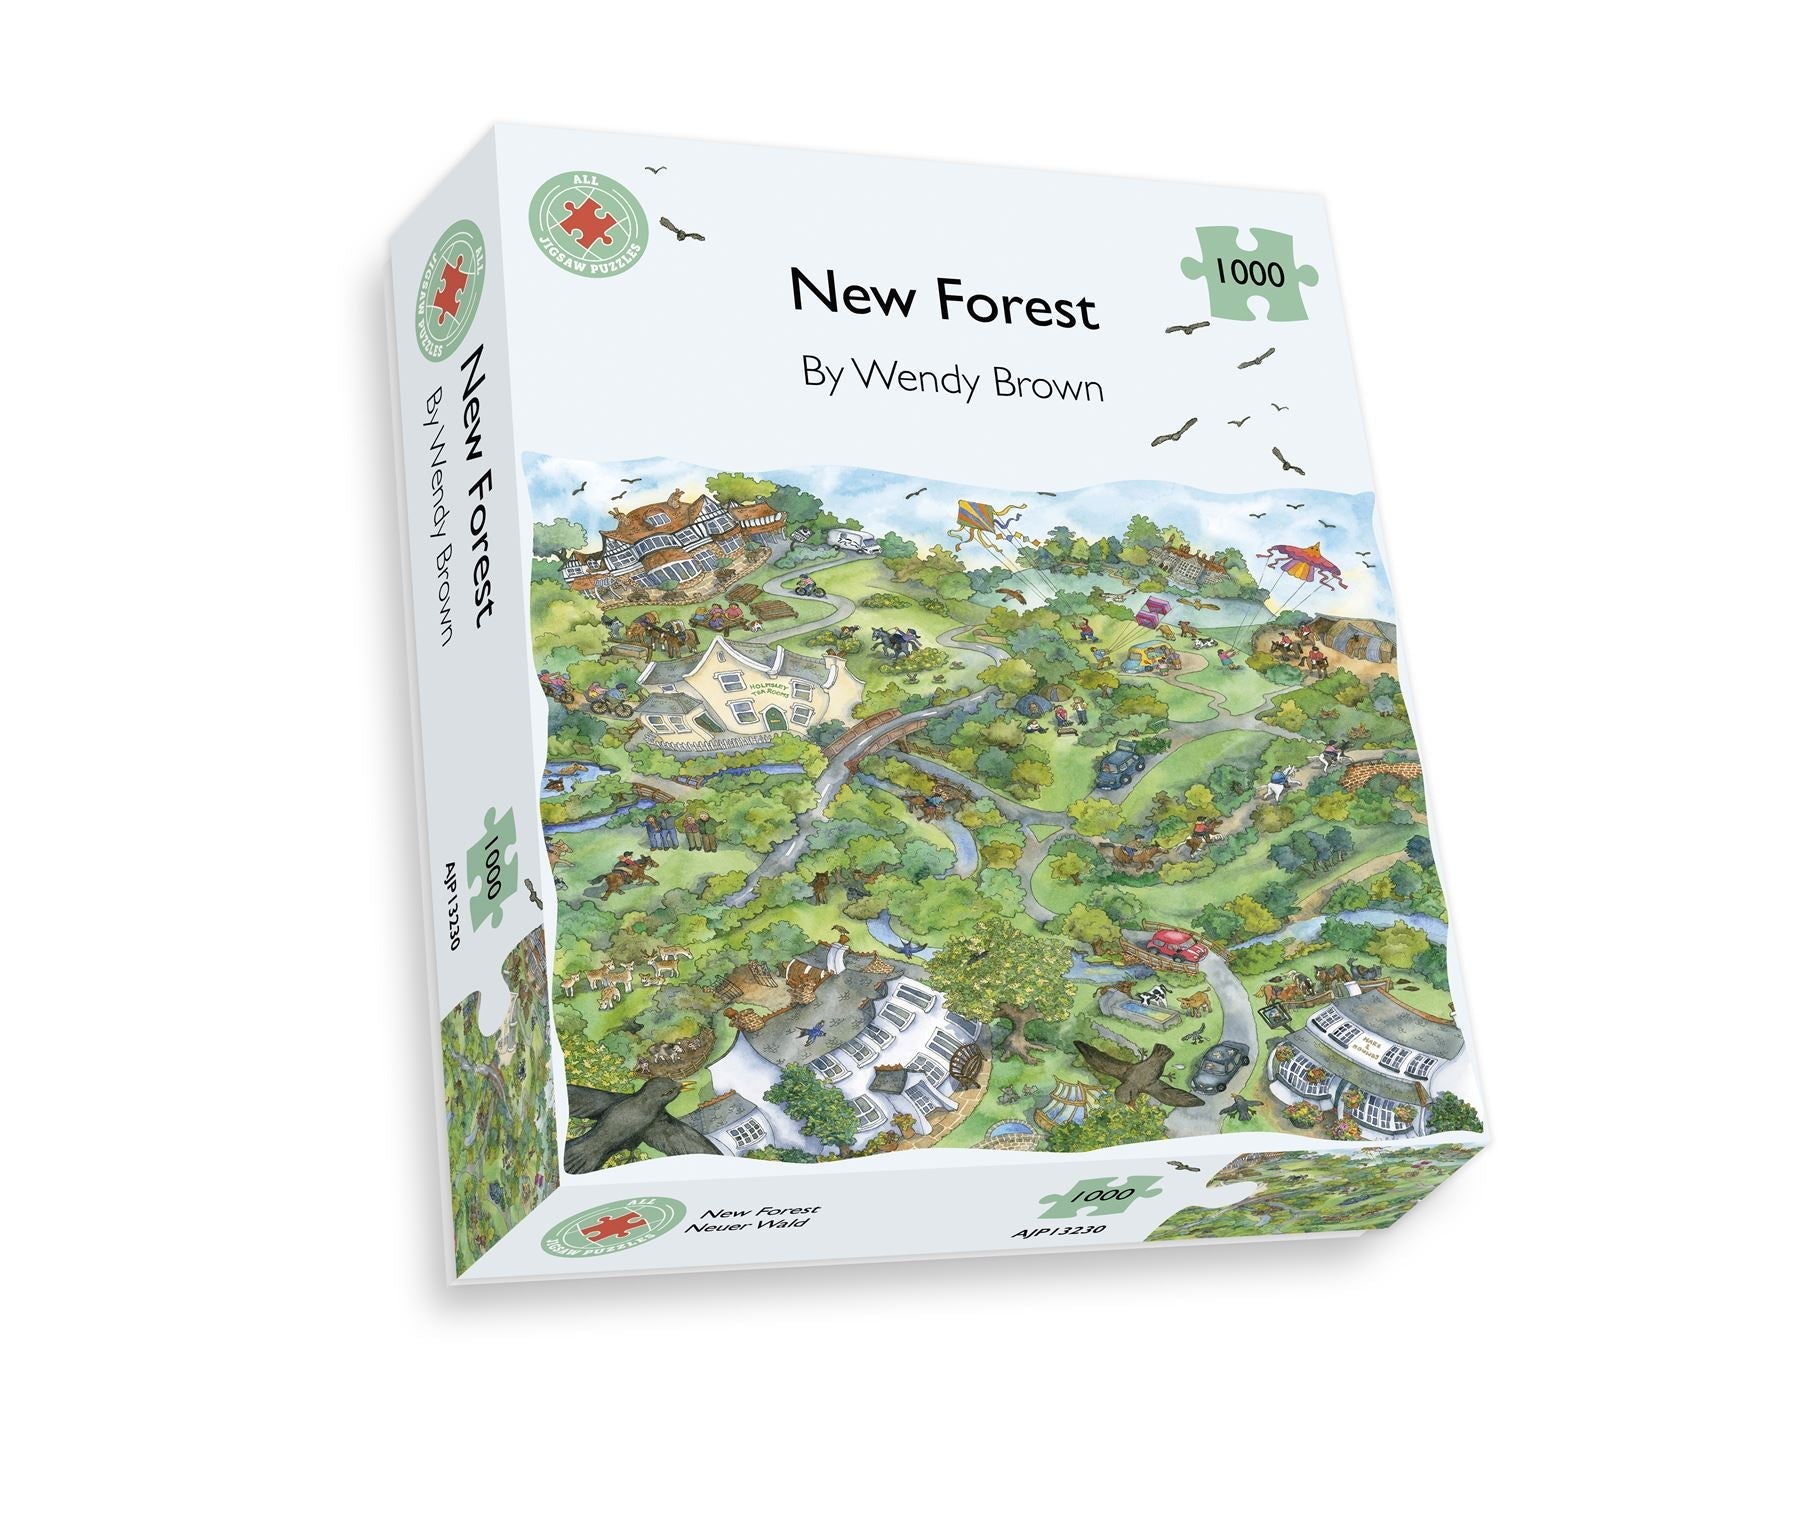 New Forest - Wendy Brown 1000 Piece Jigsaw Puzzle box